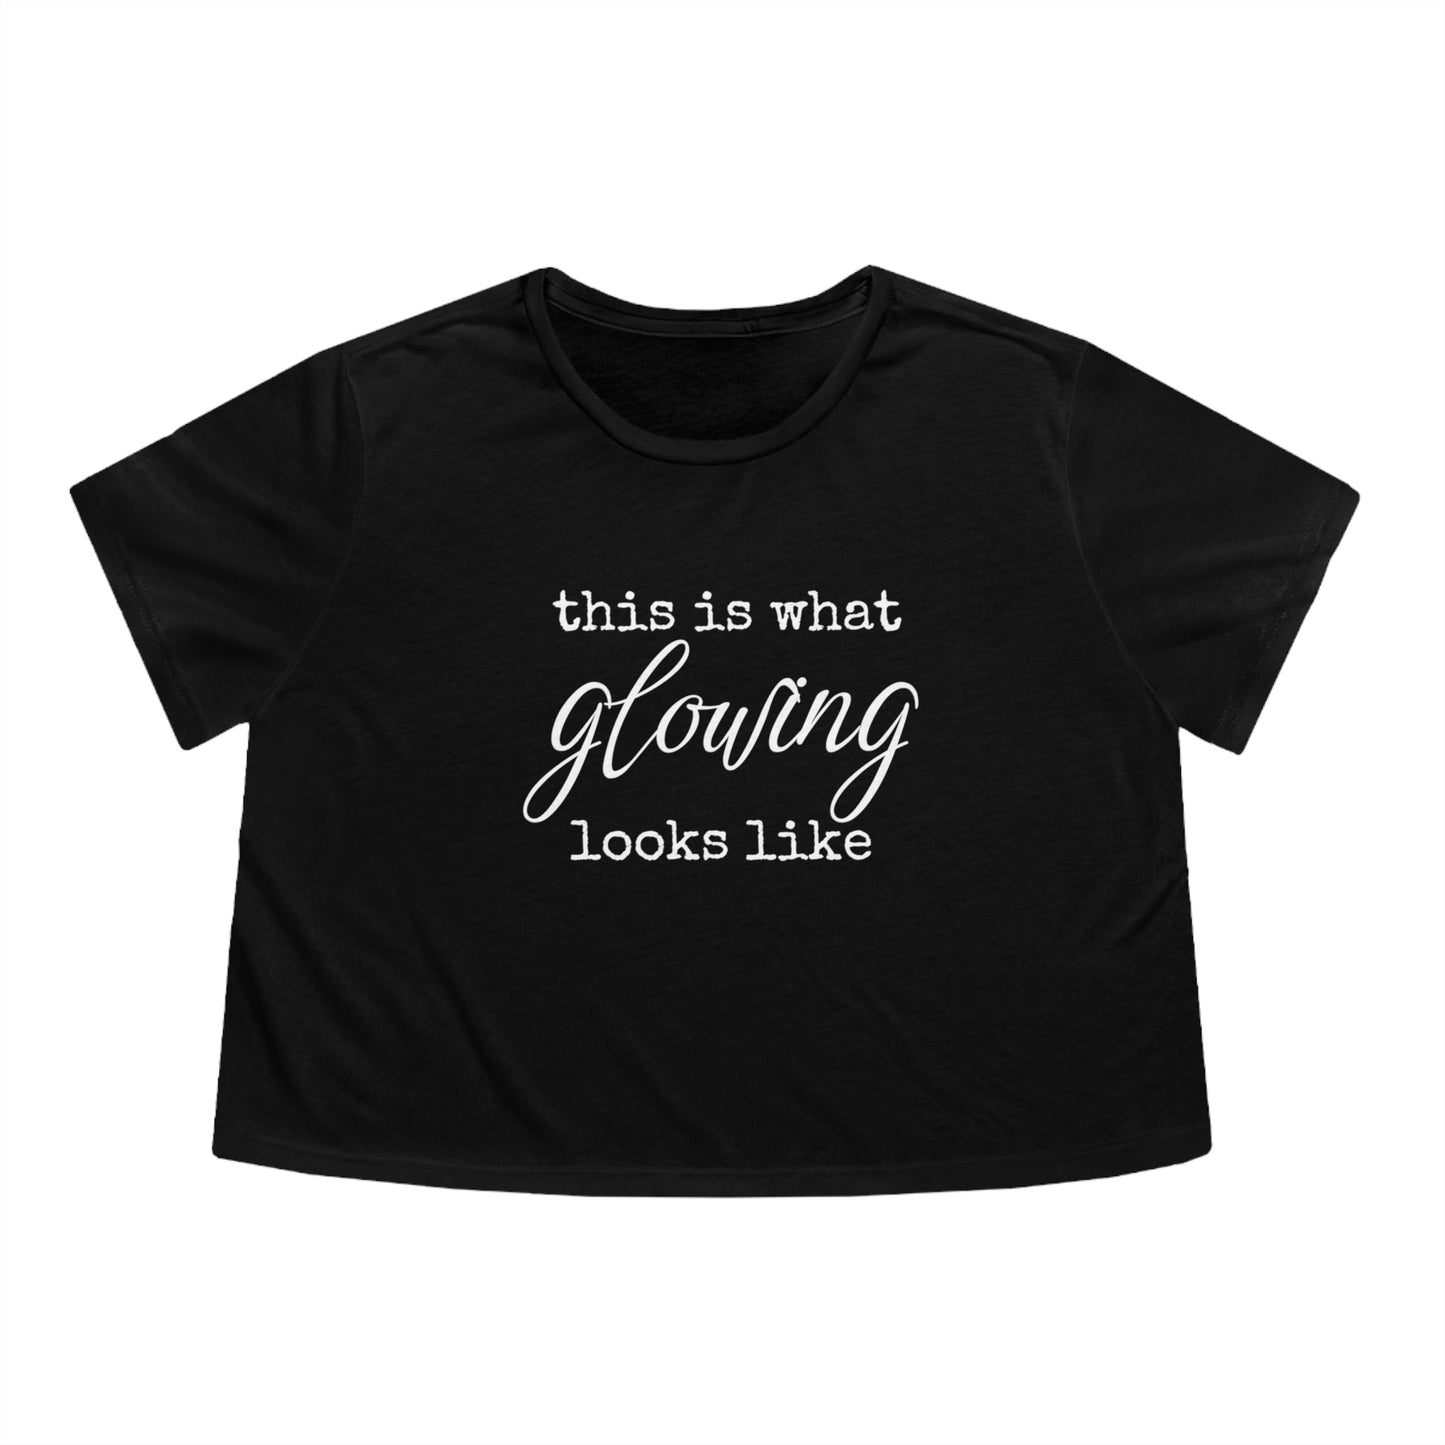 "This is what GLOWING looks like" Women's Flowy Cropped Tee